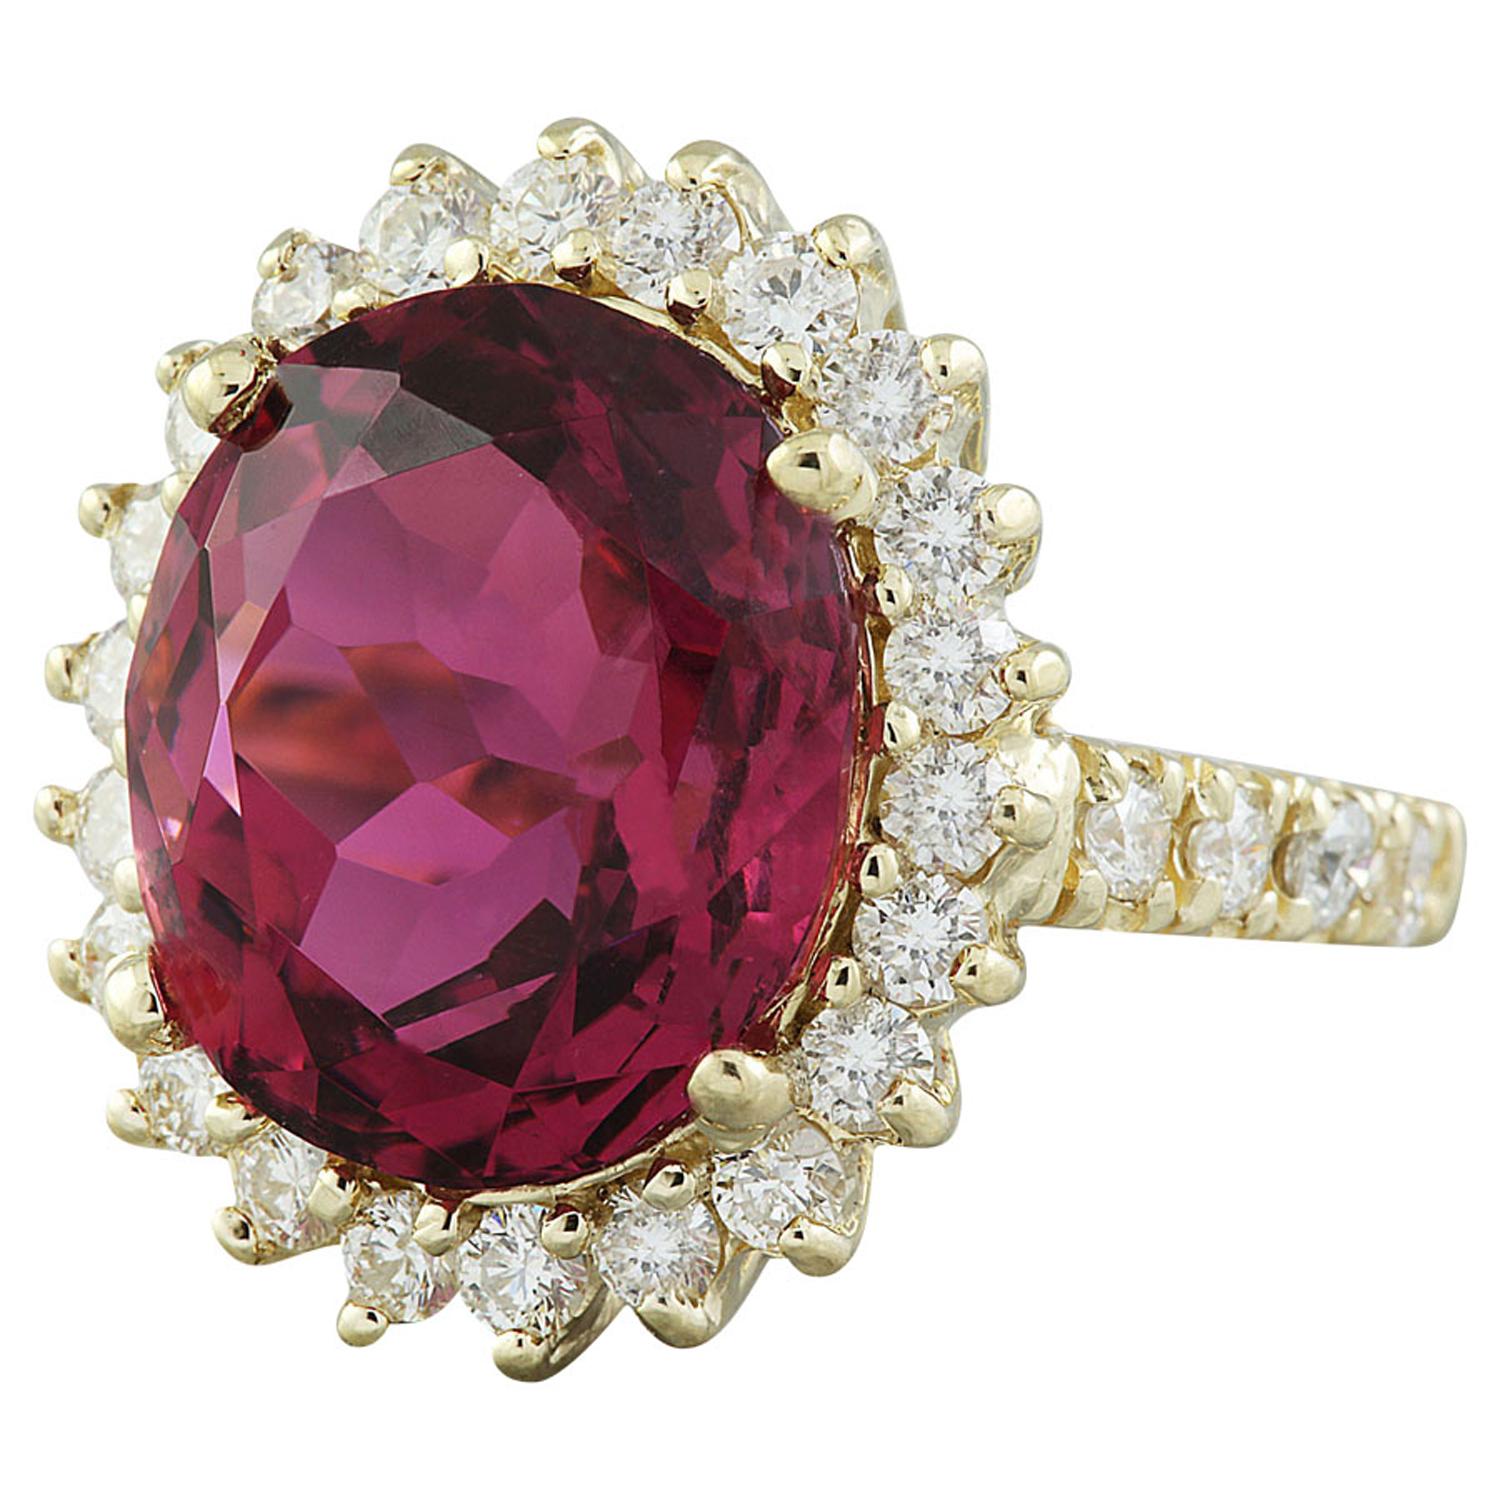 9.28 Carat Natural Tourmaline 14 Karat Solid Yellow Gold Diamond Ring
Stamped: 14K 
Total Ring Weight: 6.1 Grams
Tourmaline Weight 8.23 Carat (14.00x10.00 Millimeters)
Diamond Weight: 1.05 carat (F-G Color, VS2-SI1 Clarity )
Face Measures: